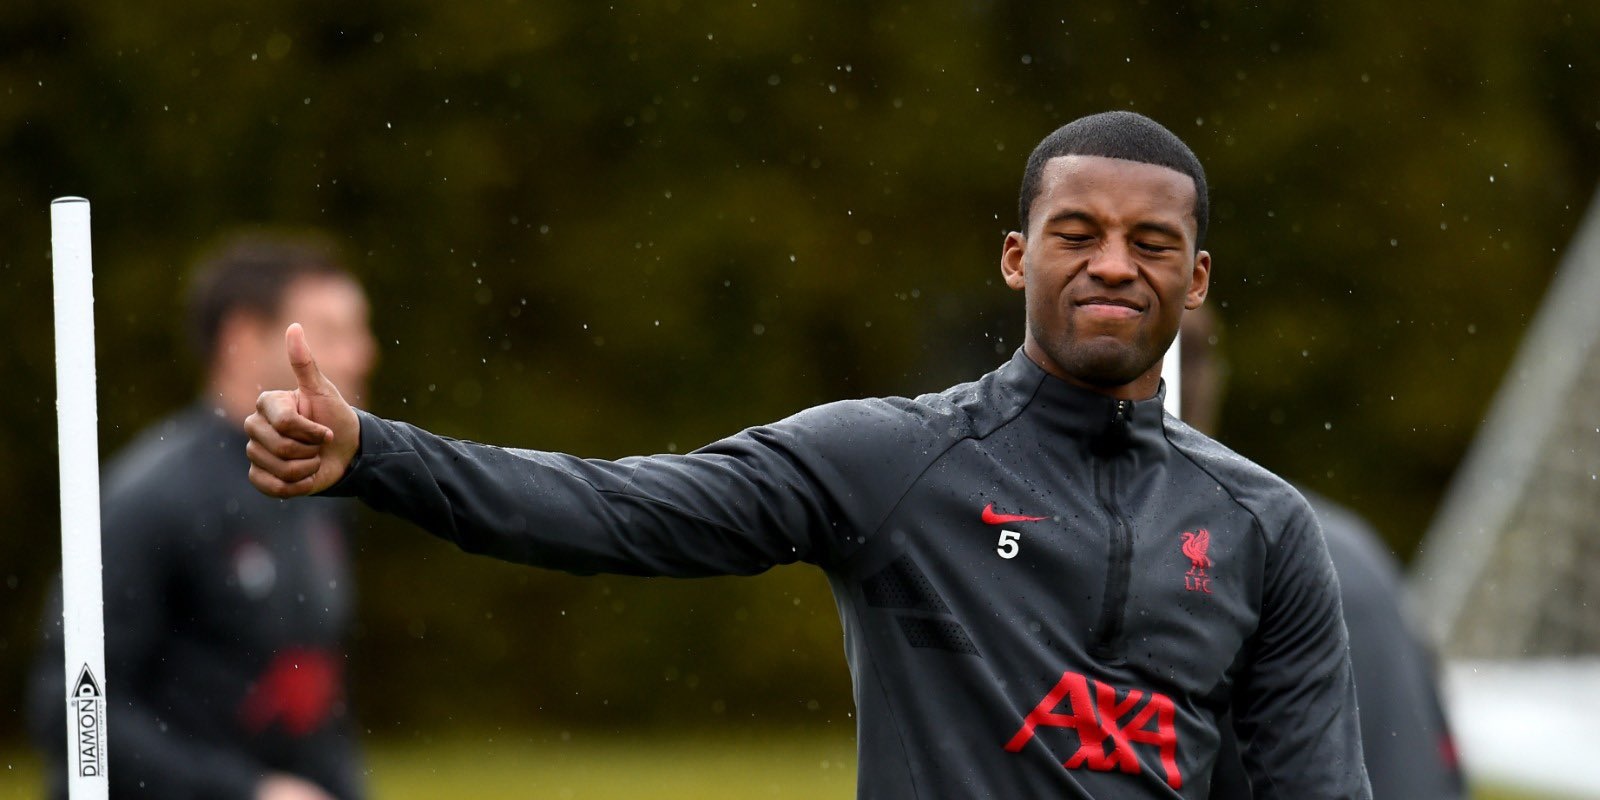 Wijnaldum’s move to Barcelona is off; Liverpool star agrees to huge wage hike – report